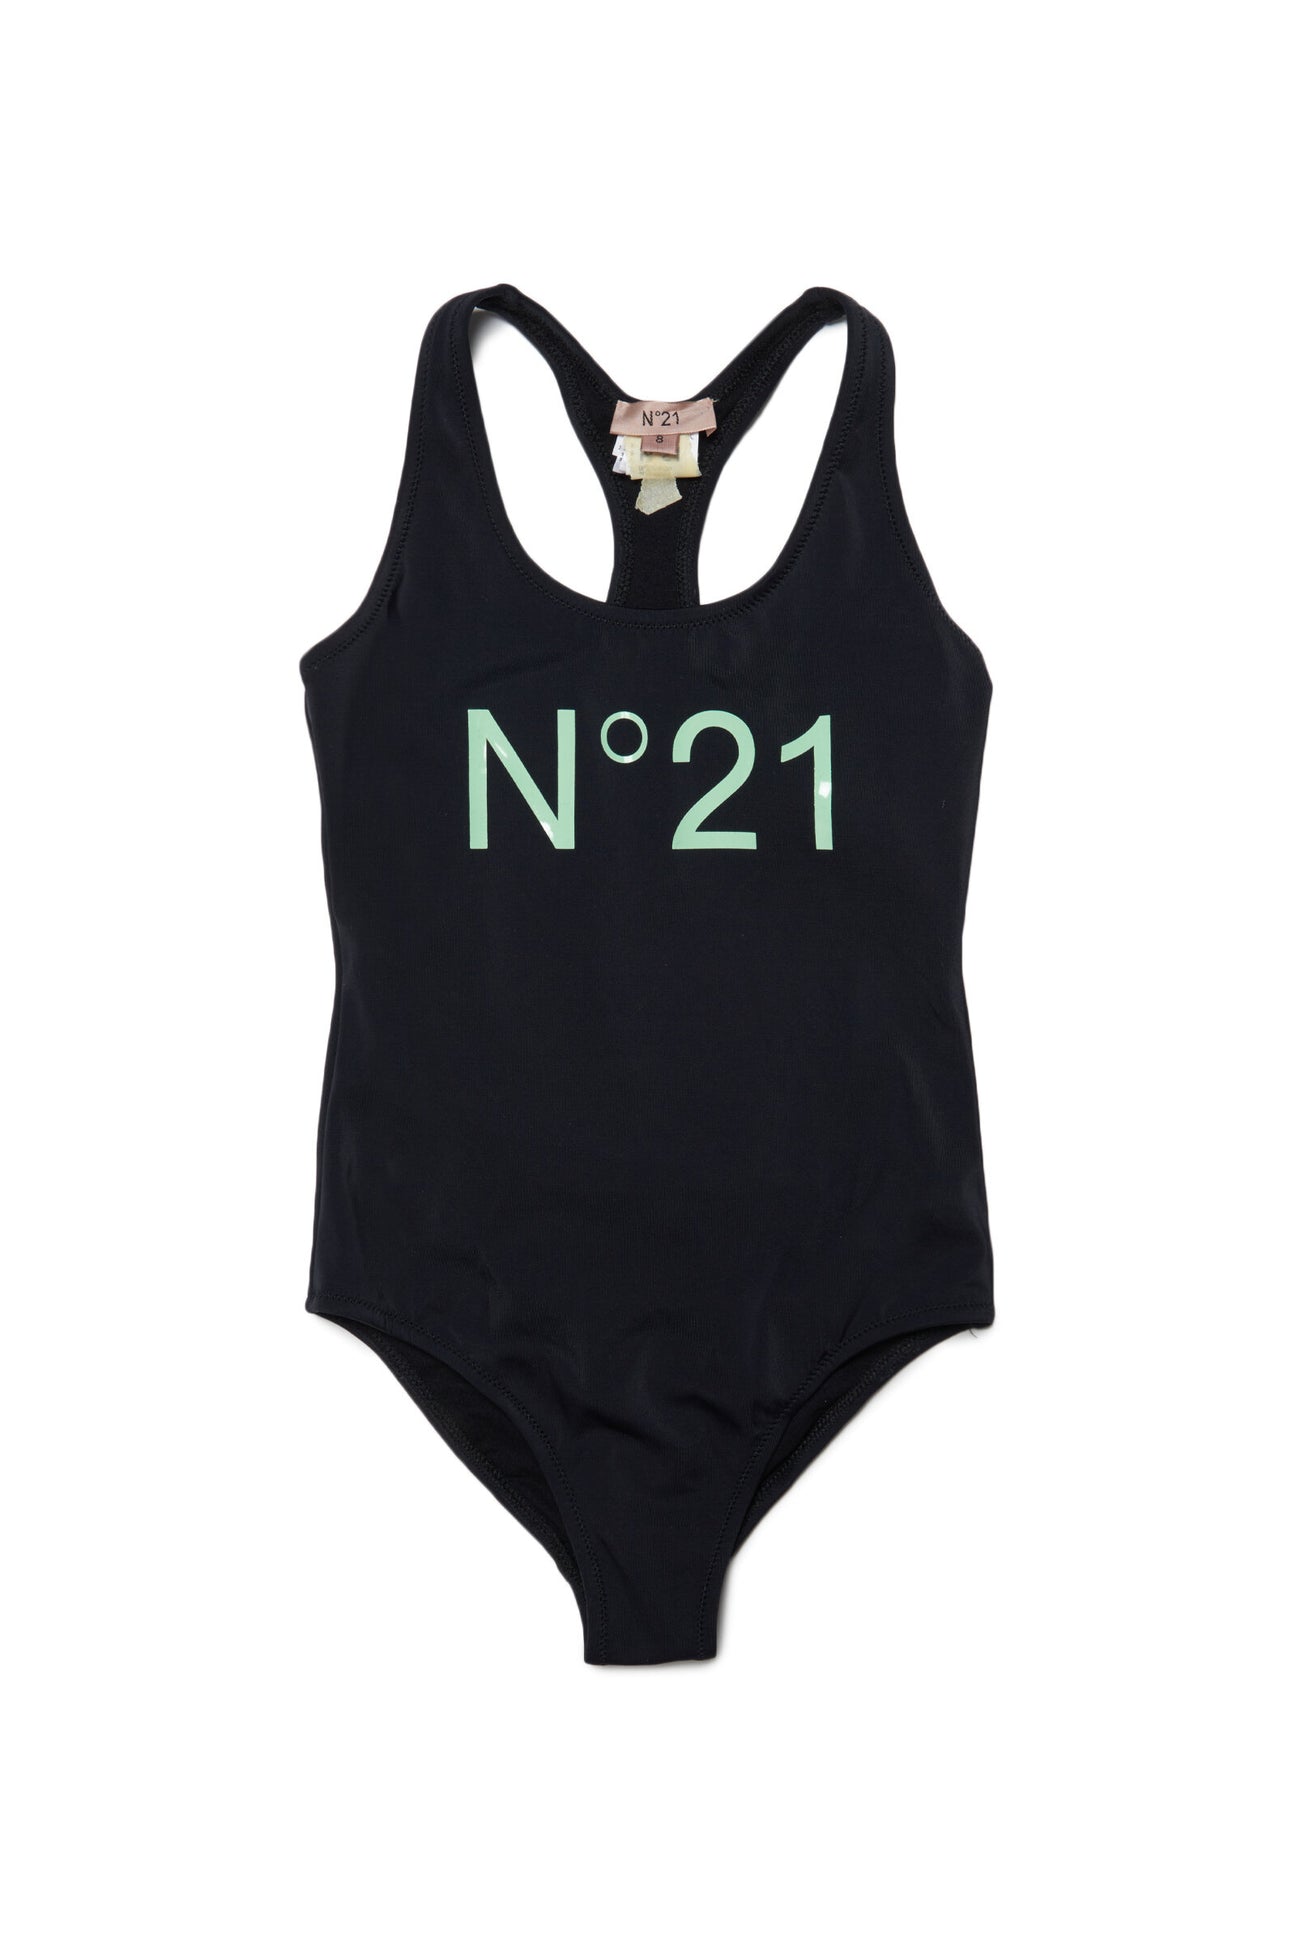 Black lycra one-piece swimming costume with logo 